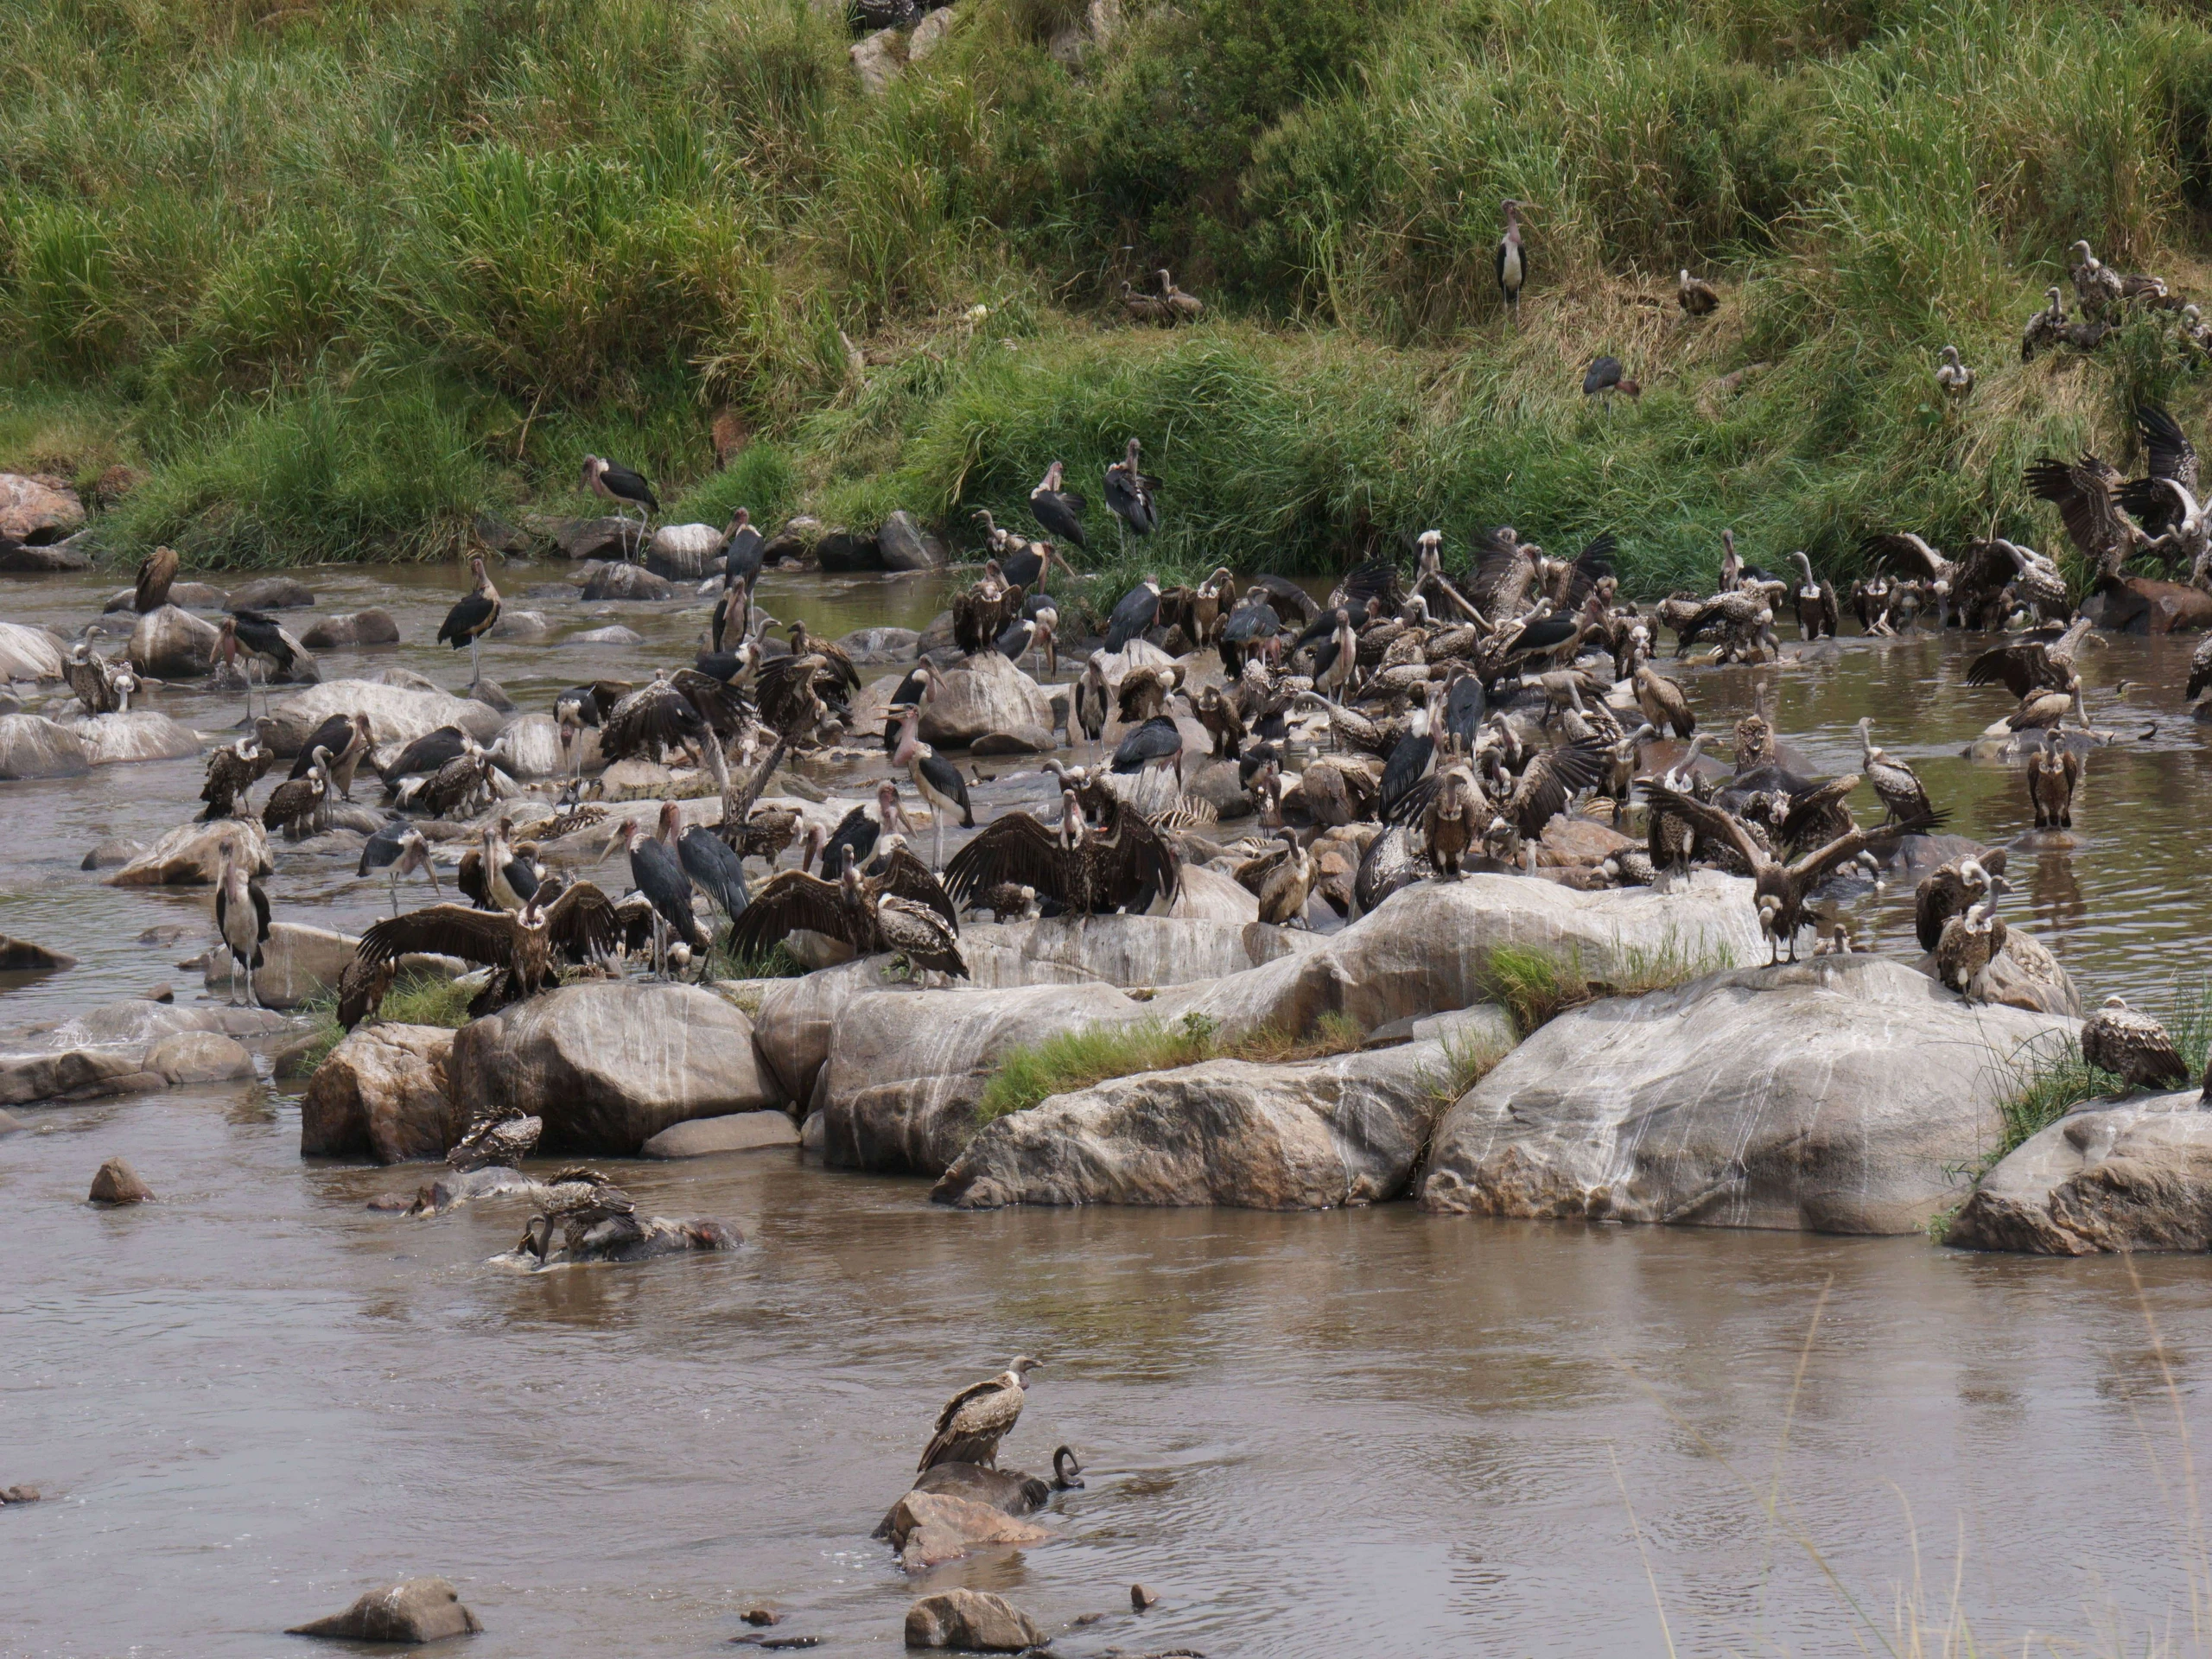 Vultures feasting on the dead Wildebeest in the Mara River